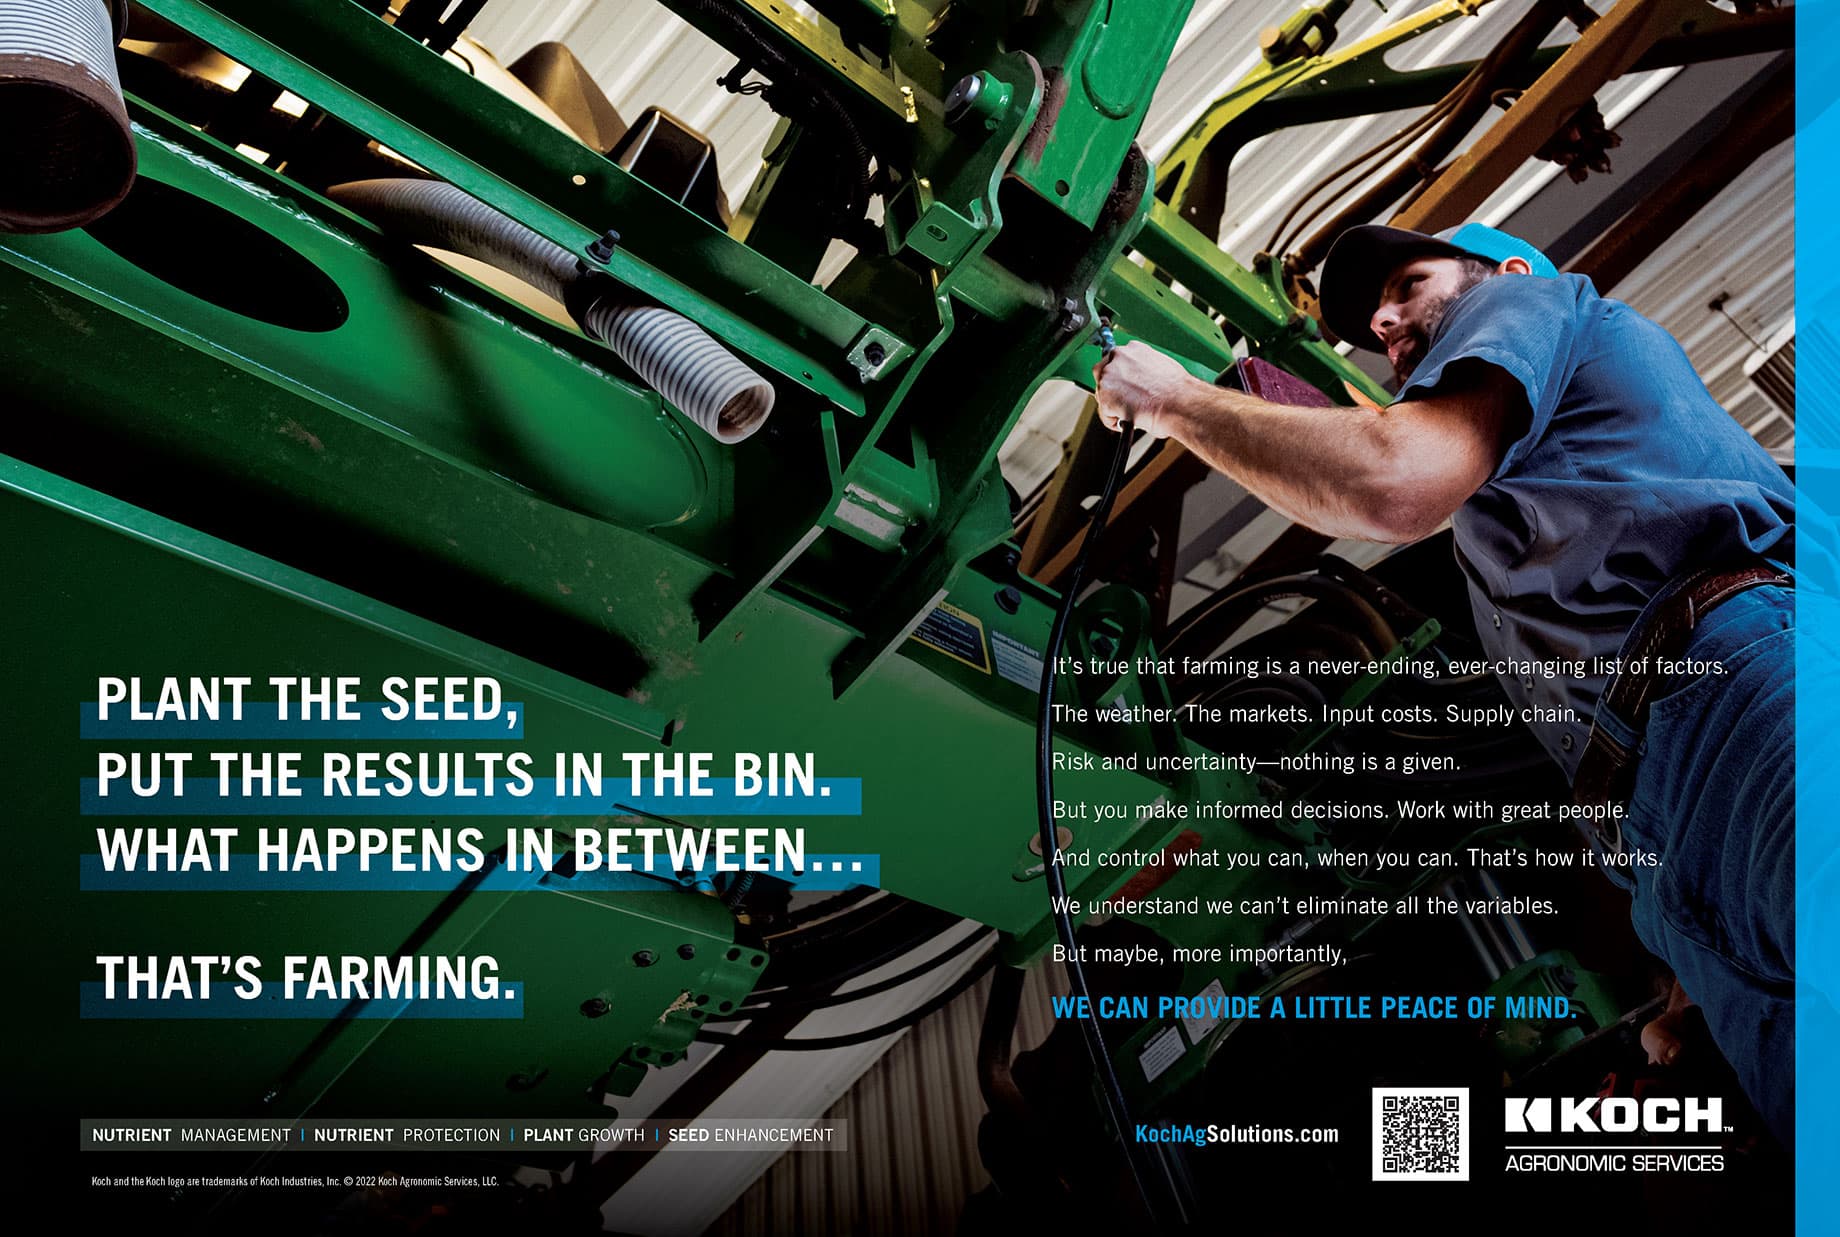 Koch Agronomic Services That’s Farming Spread Print Ad